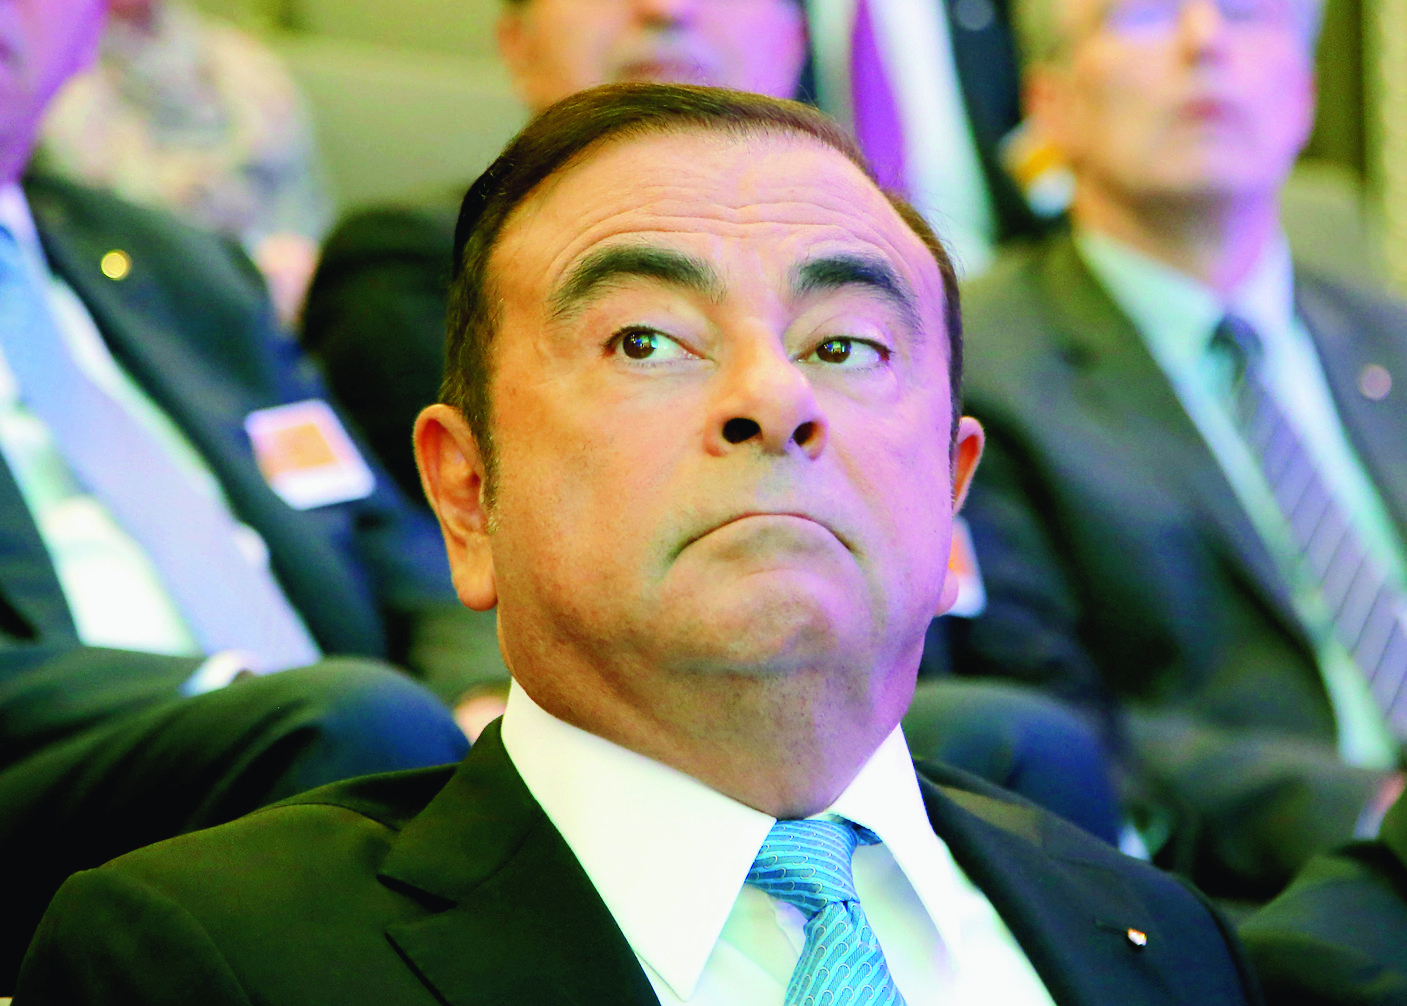 Renault Group CEO Carlos Ghosn attend a media conference at La Defense business district, outside Paris, France, Friday, Oct. 6, 2017. French carmaker Renault says half of its models will be electric or hybrid by 2022 and it's investing heavily in "robo-vehicles" with increasing degrees of autonomy. (AP Photo/Michel Euler) France Renault